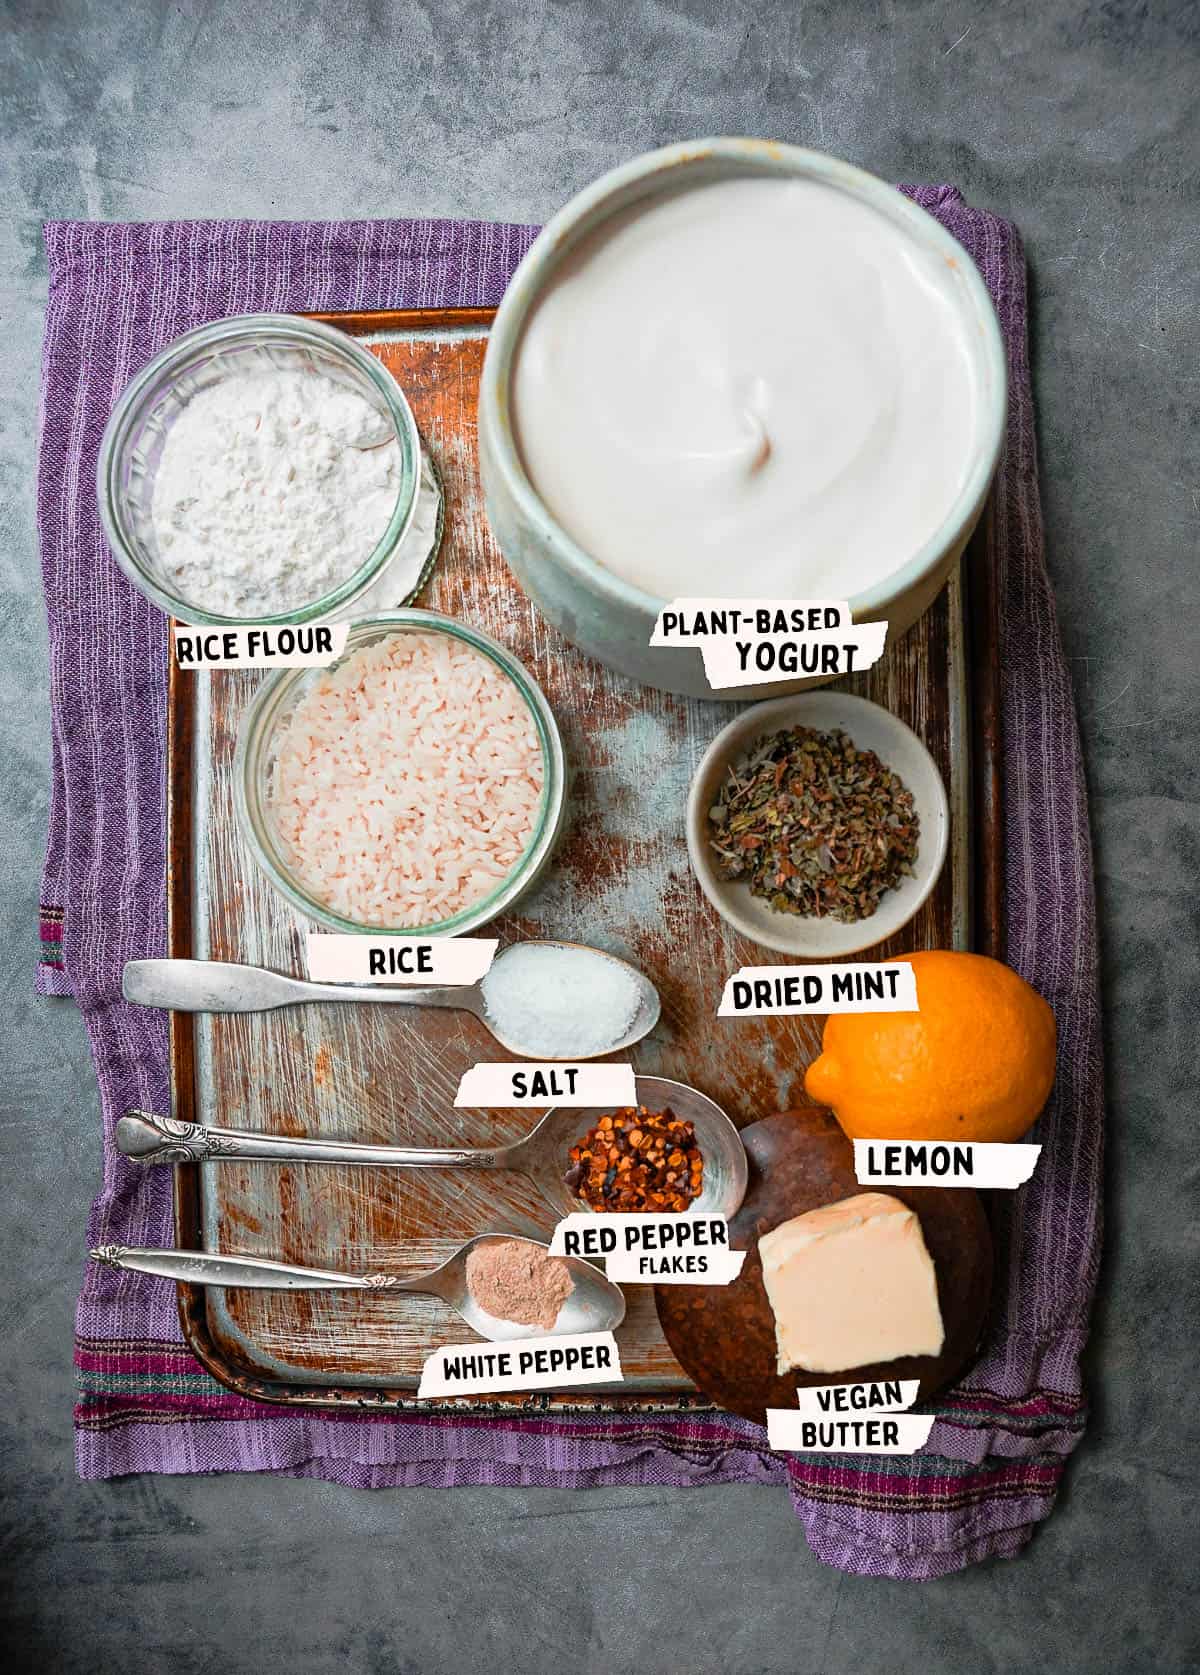 Ingredients for making yalya corbasi are measured and labeled on a metal tray.